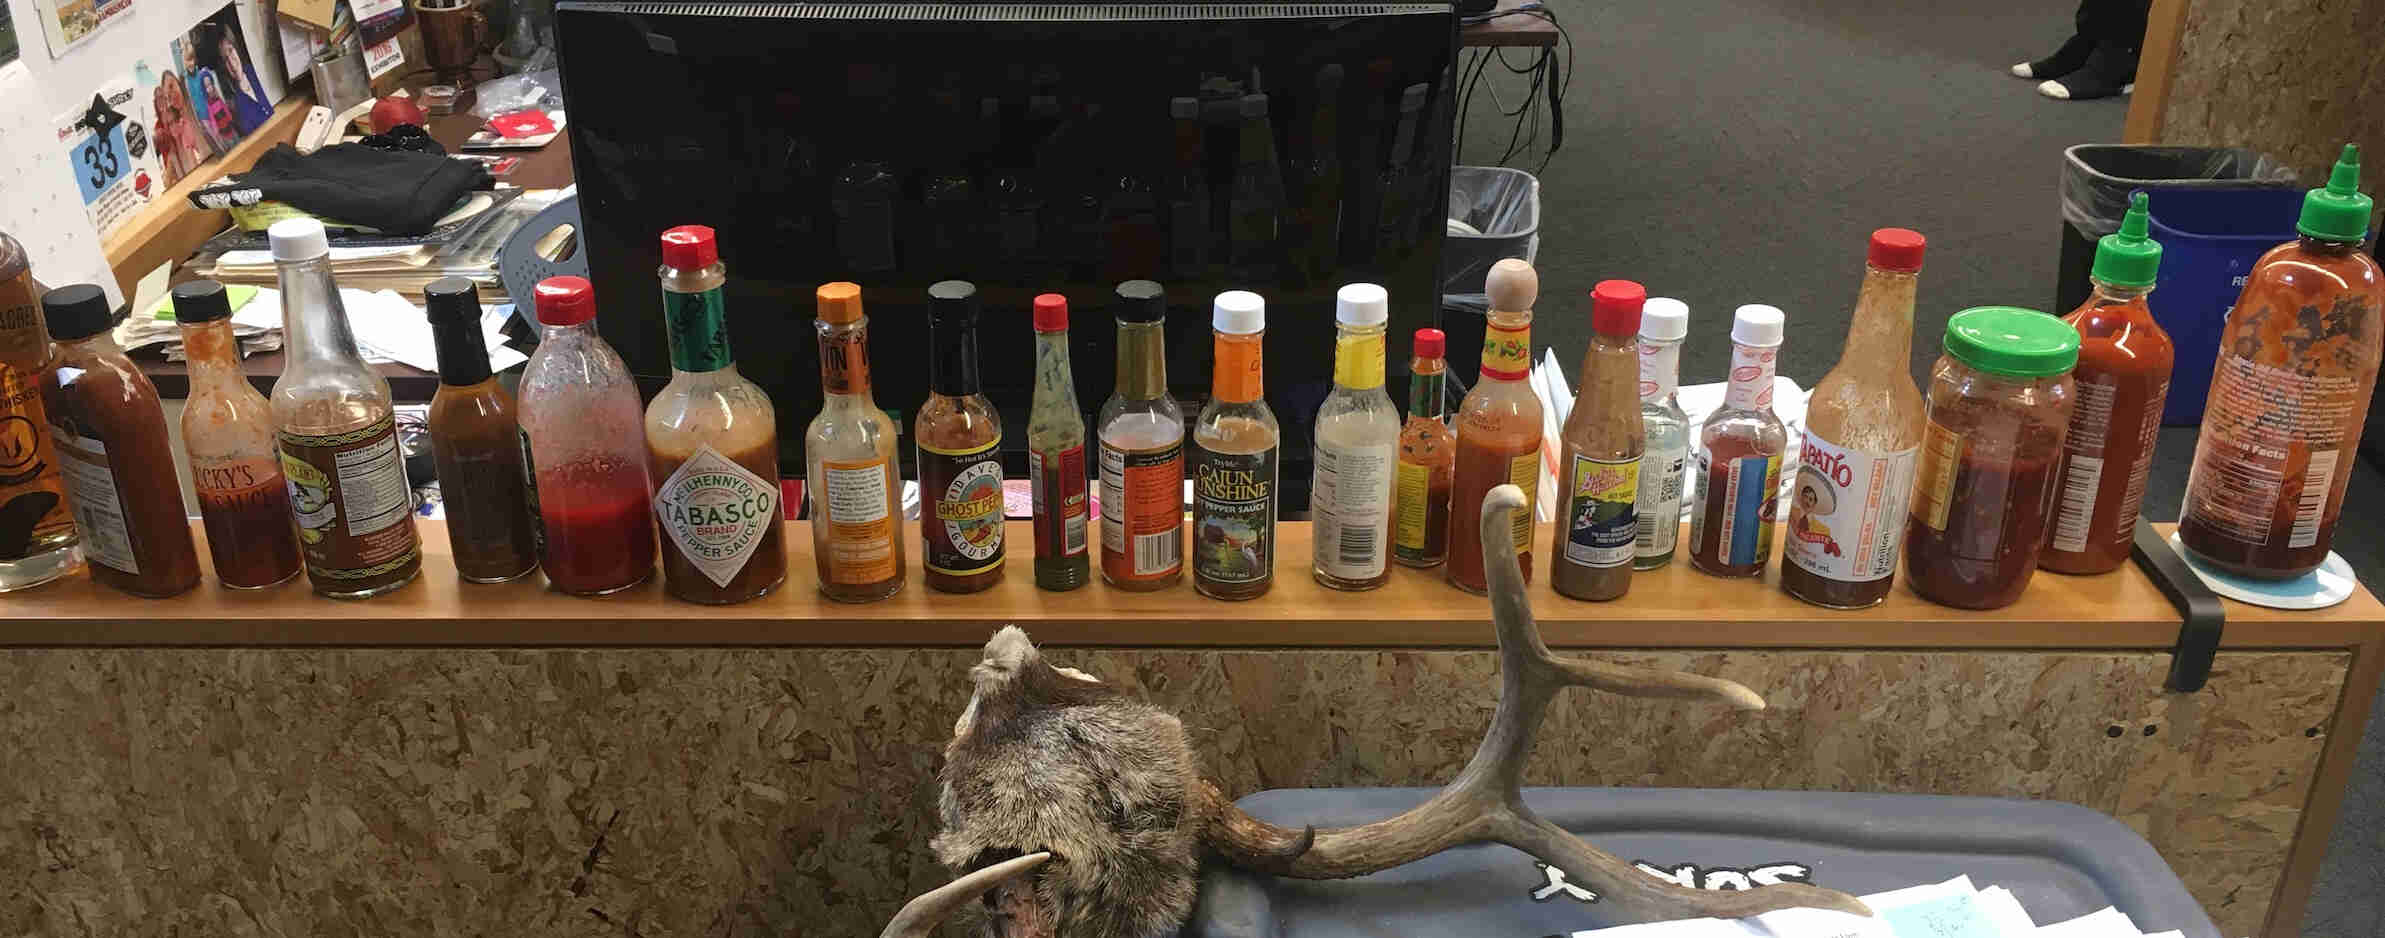 A row of hot sauce bottles lined up on a ledge, behind a tote with a deer antler on top